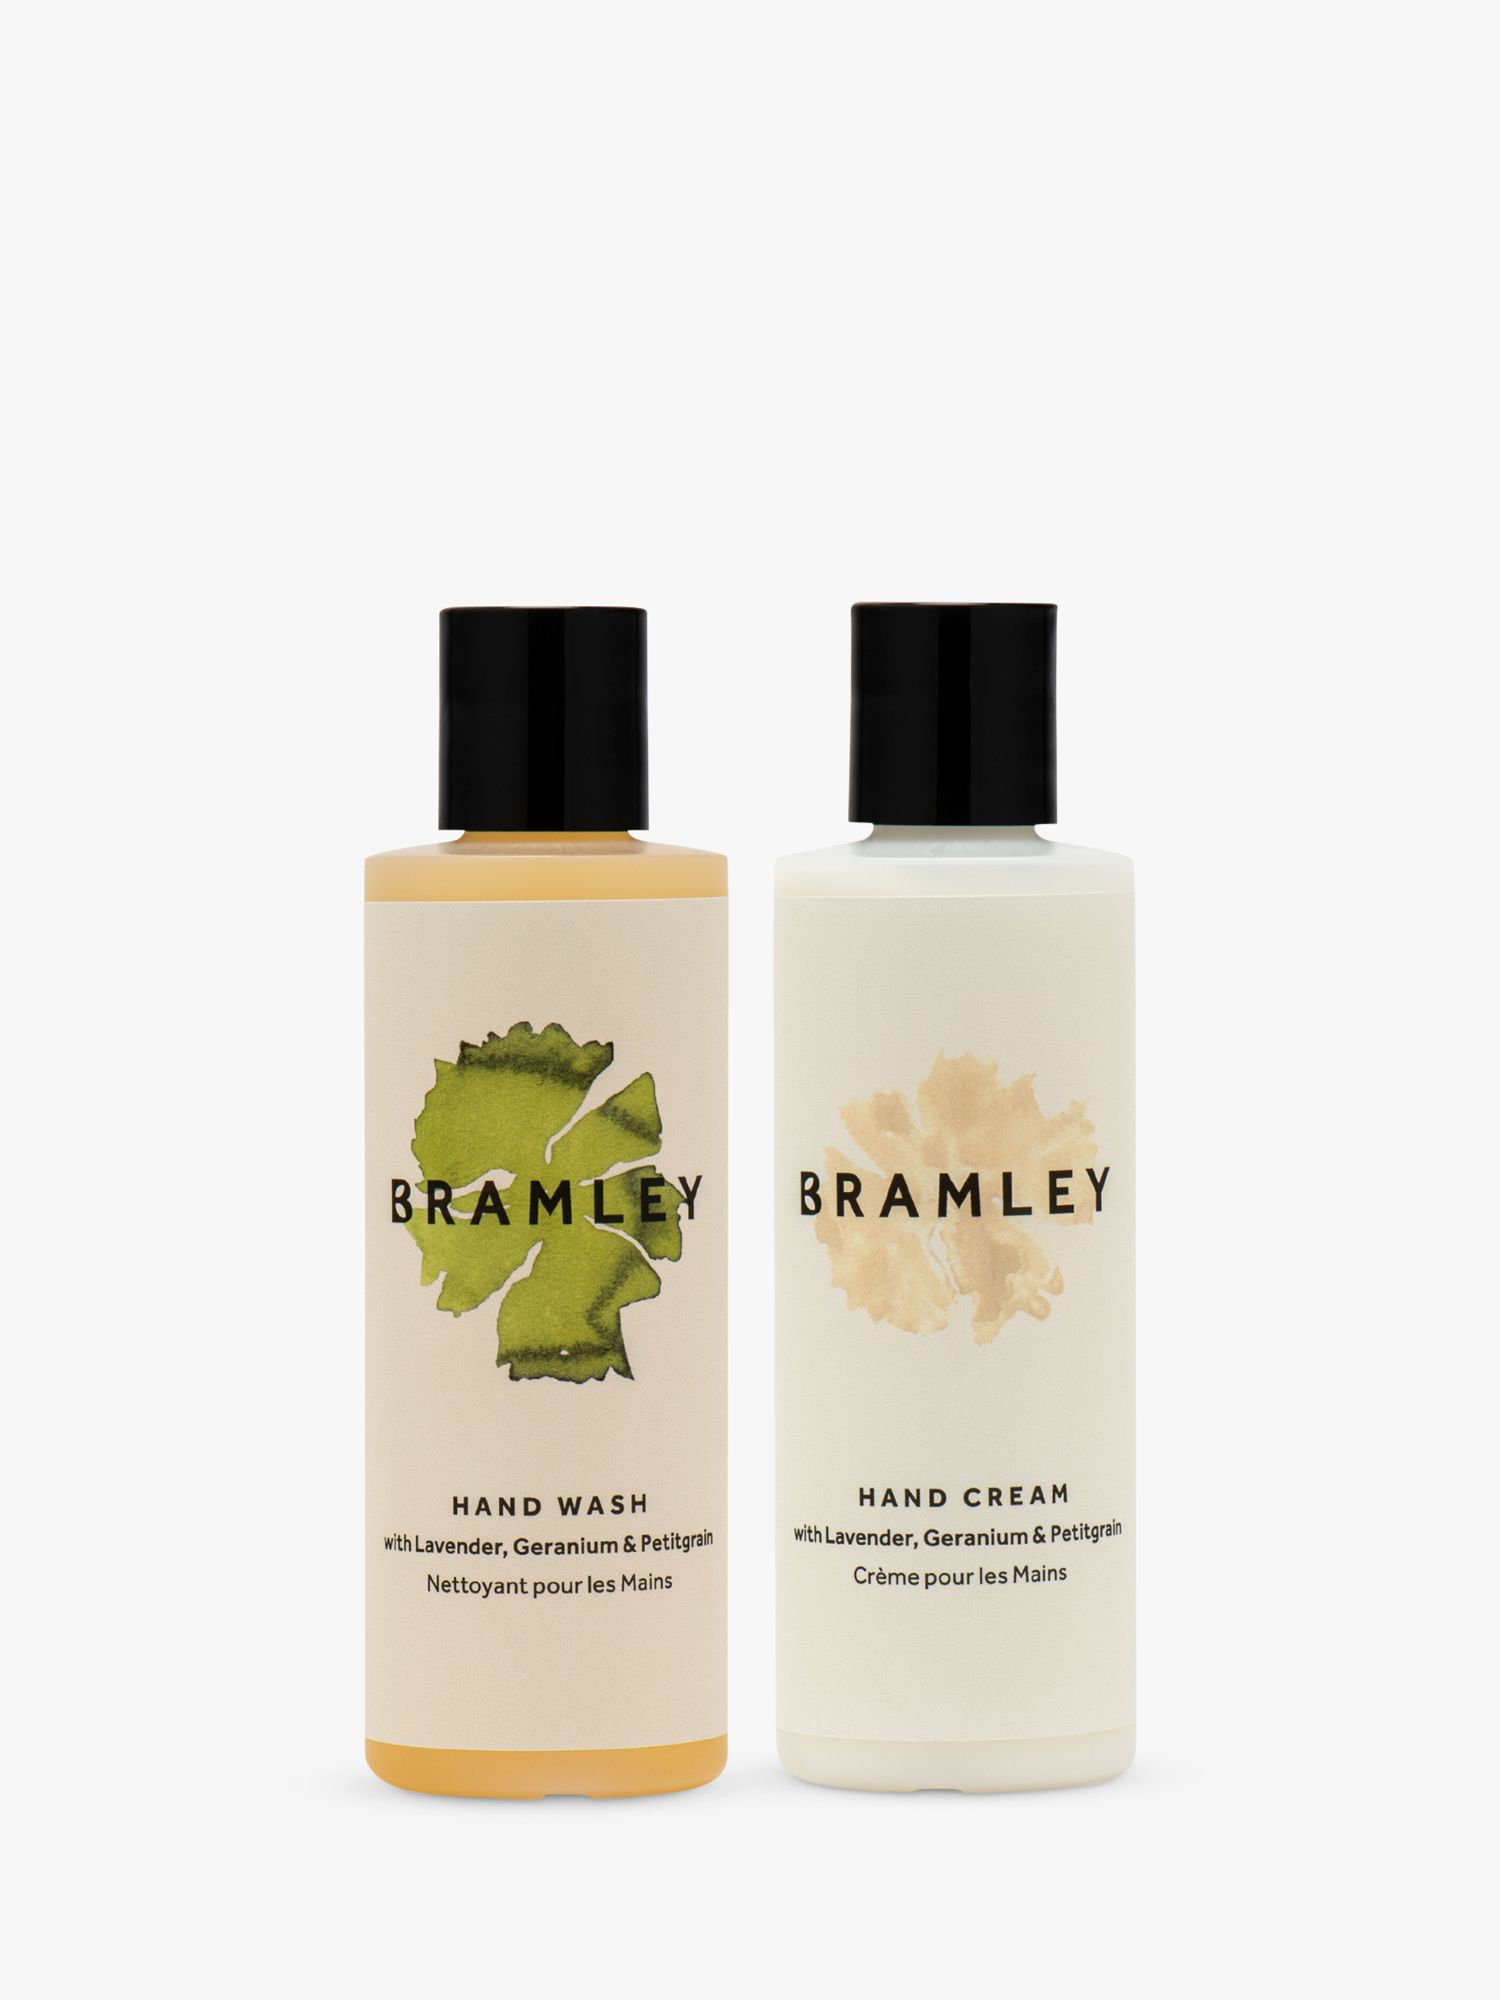 Bramley Discovery Hand Care Gift Set 2